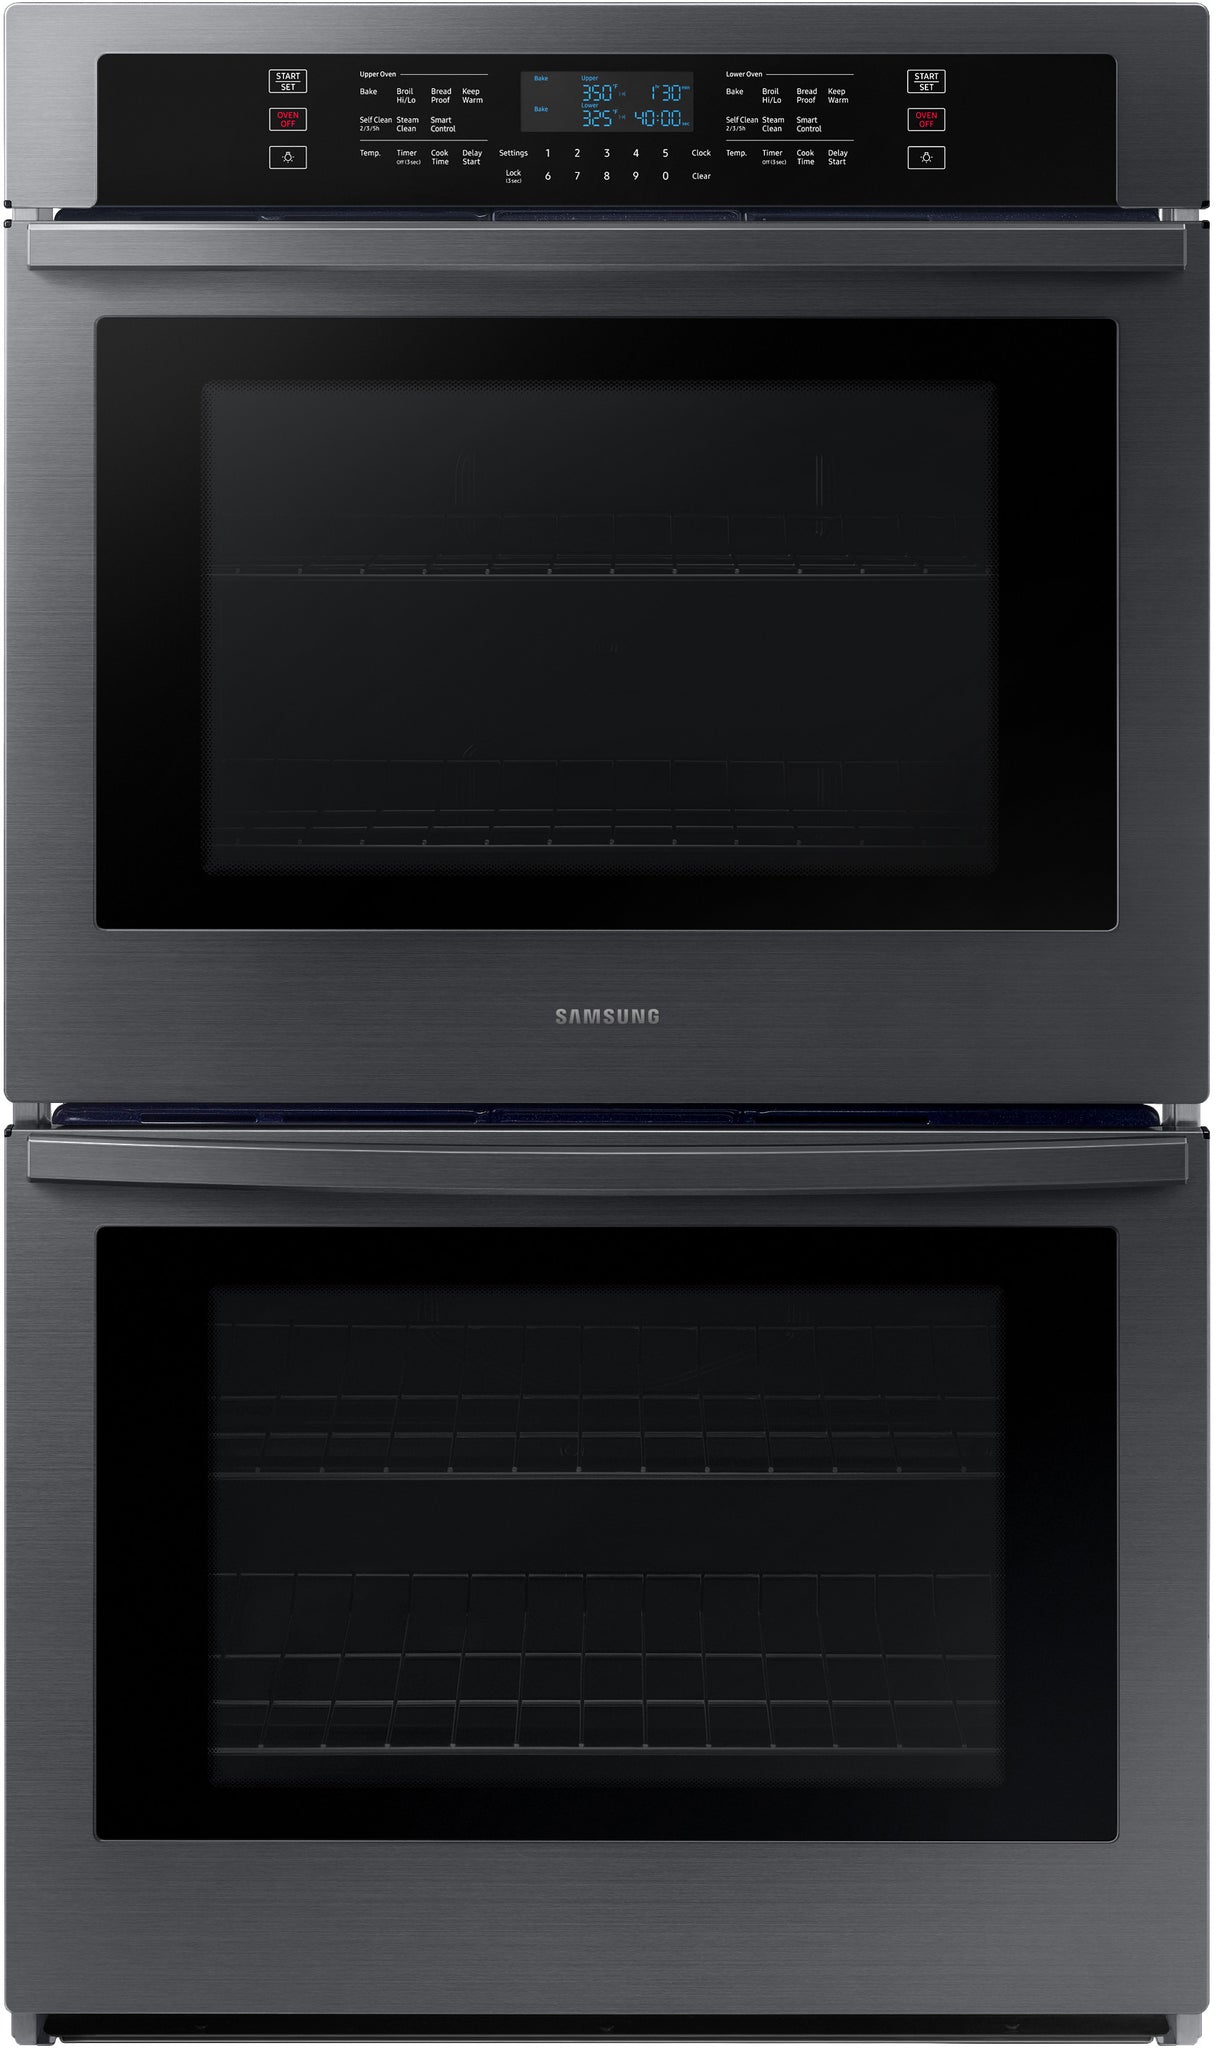 Samsung NV51T5511DG 30 Inch Double Wall Oven with 10.2 Cu. Ft Total Oven Capacity